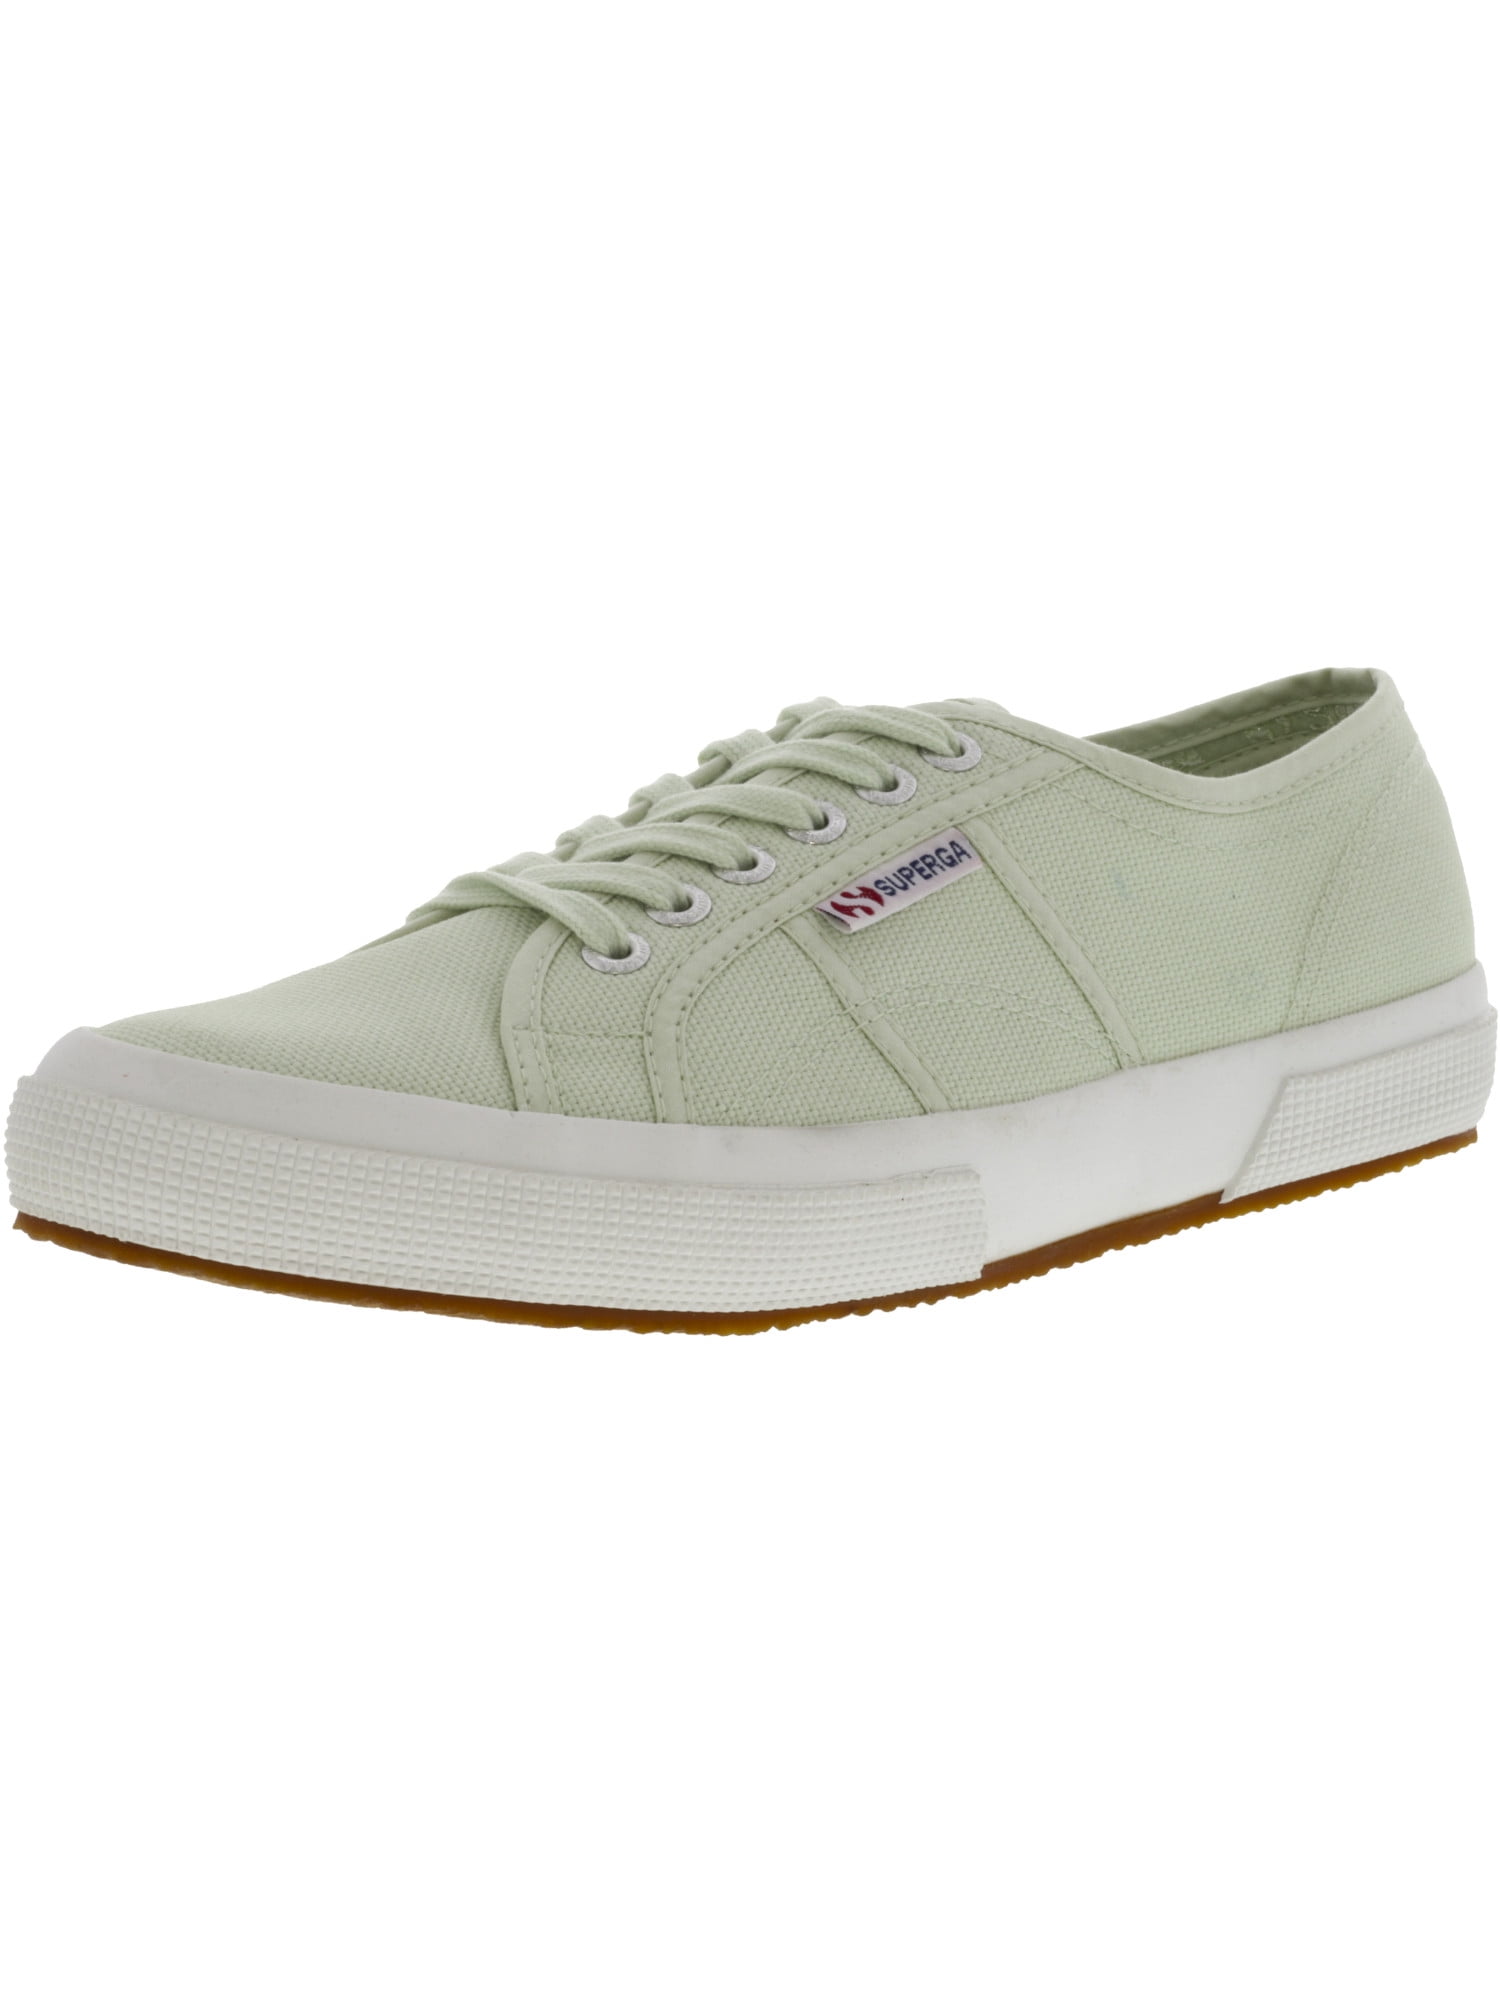 Superga 2750-cotu Classic Unisex Adults Fashion Low-Top Trainers